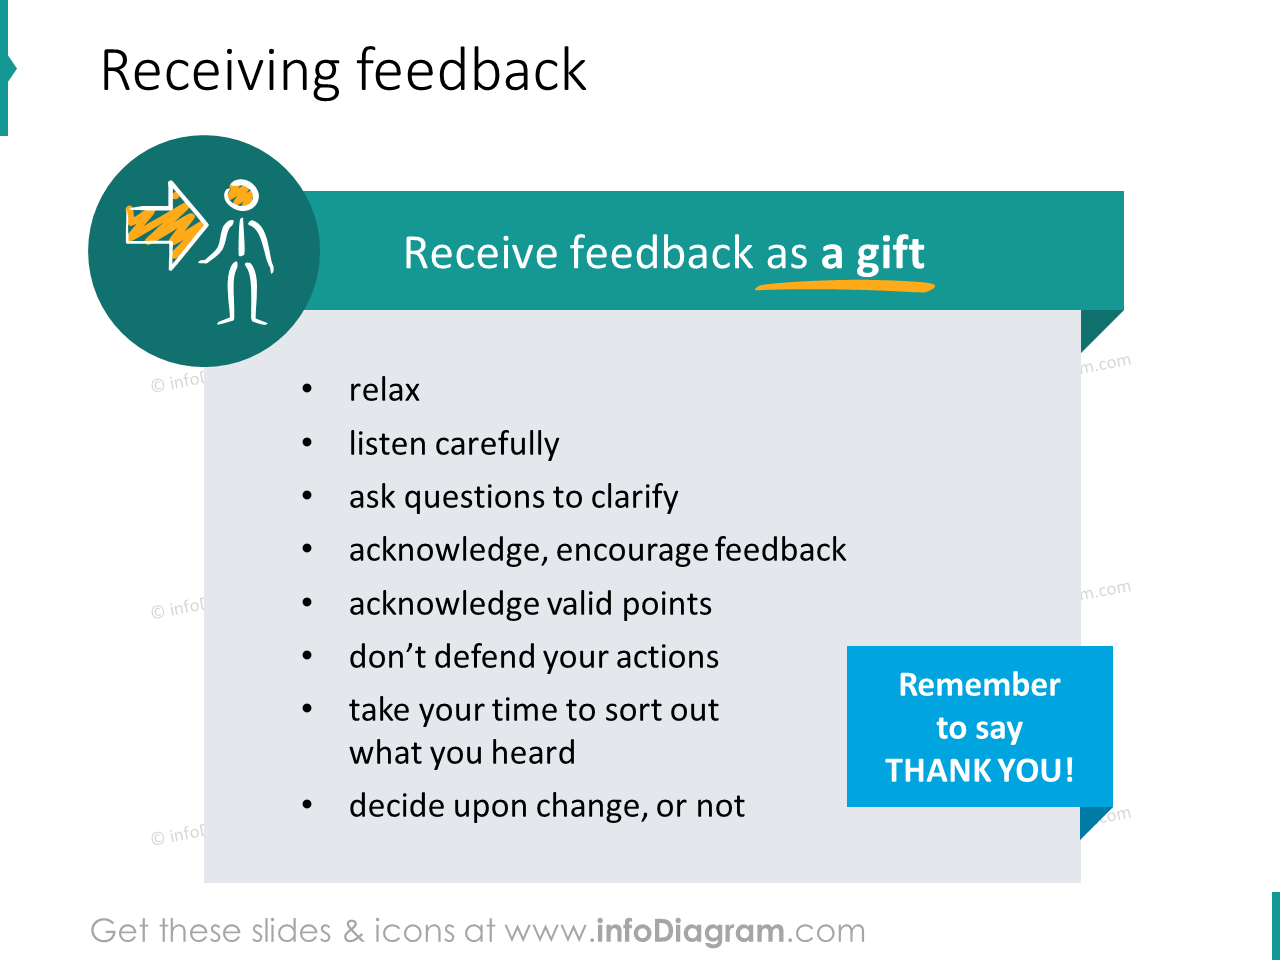 Feedback is a Gift